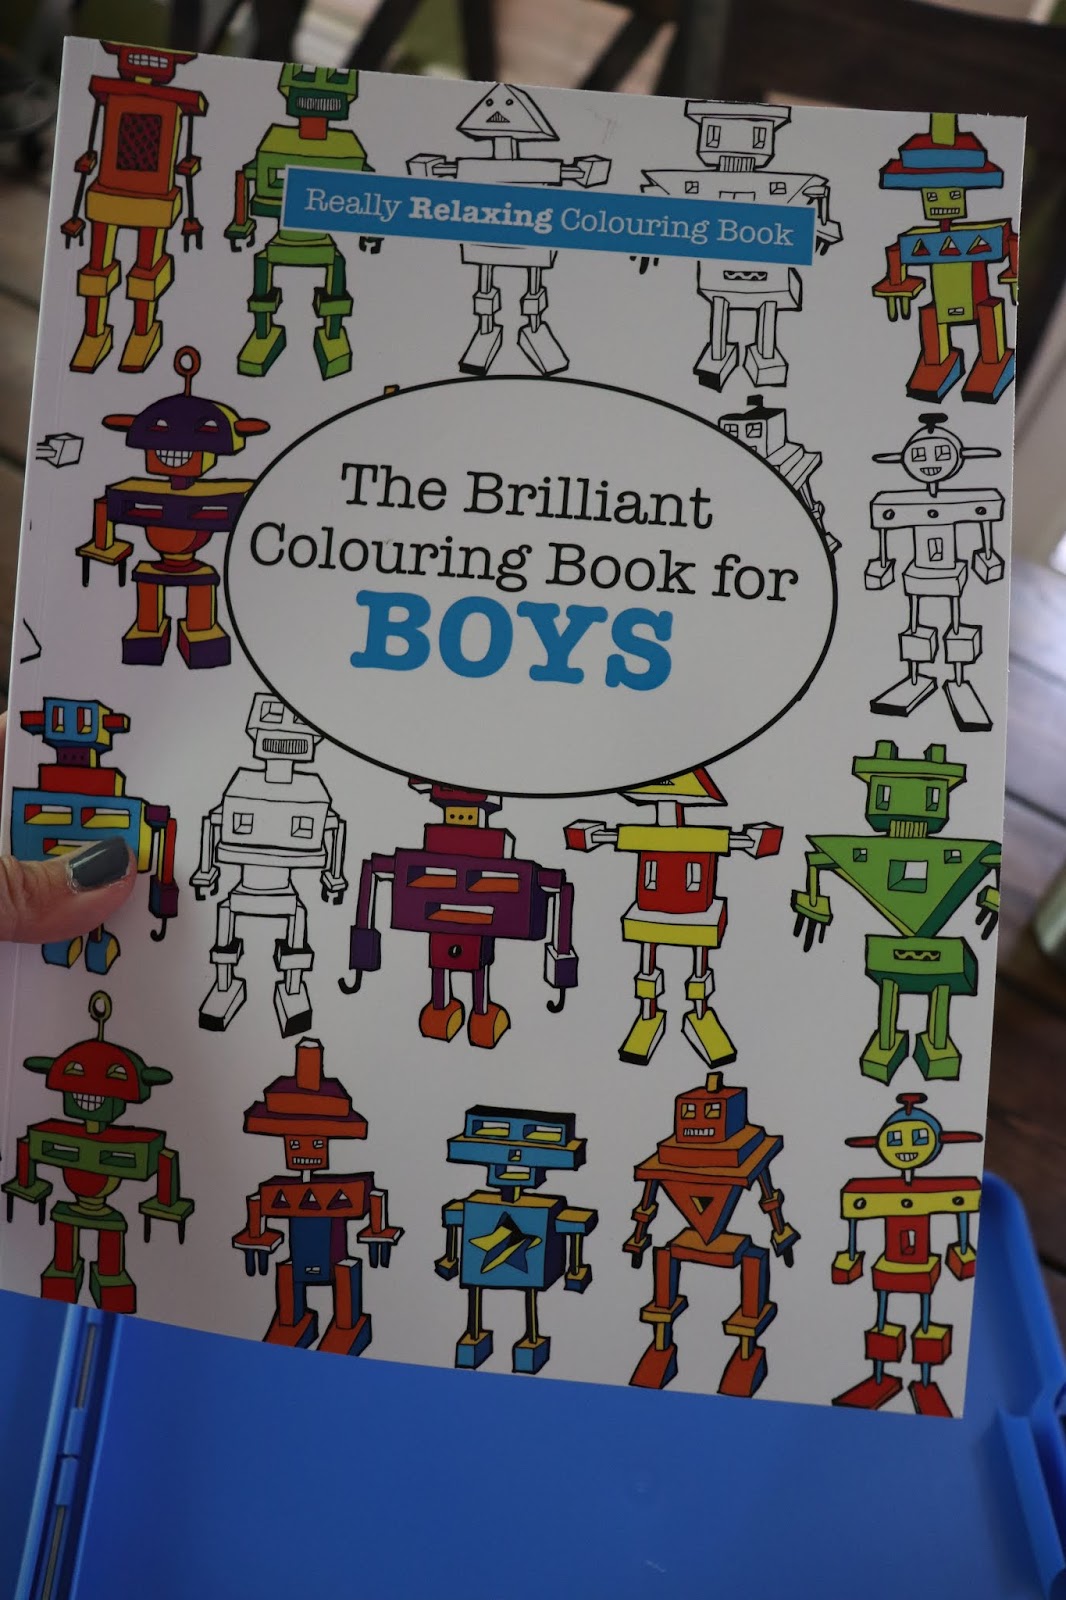 The Brilliant Colouring Book for BOYS (A Really RELAXING Colouring Book)